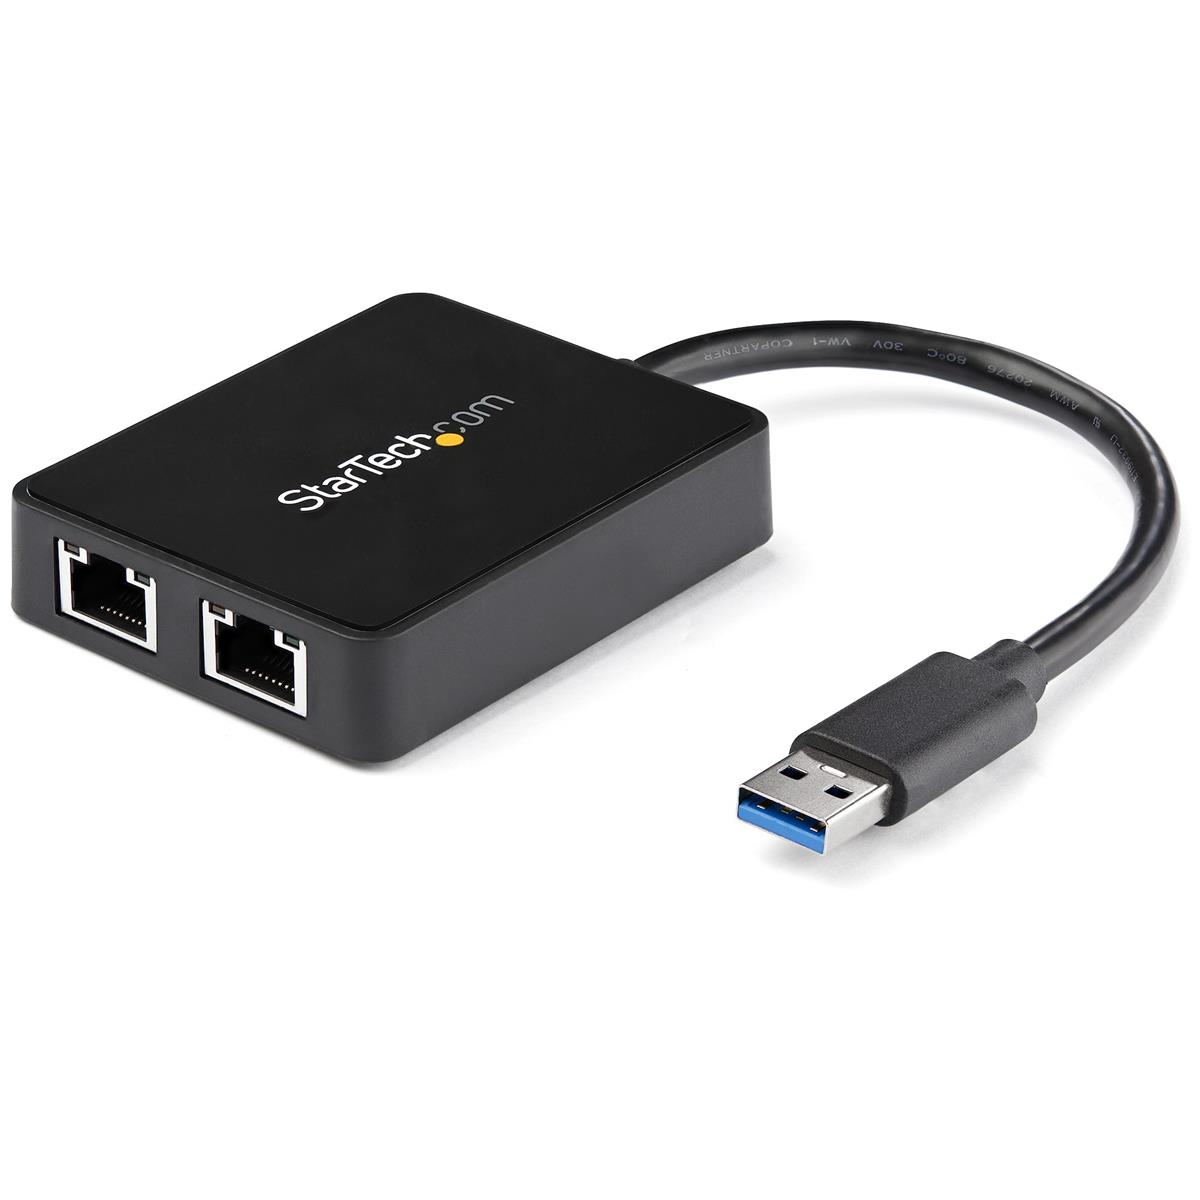 

StarTech USB 3.0 to Dual Port Gigabit Ethernet NIC Adapter with USB Port